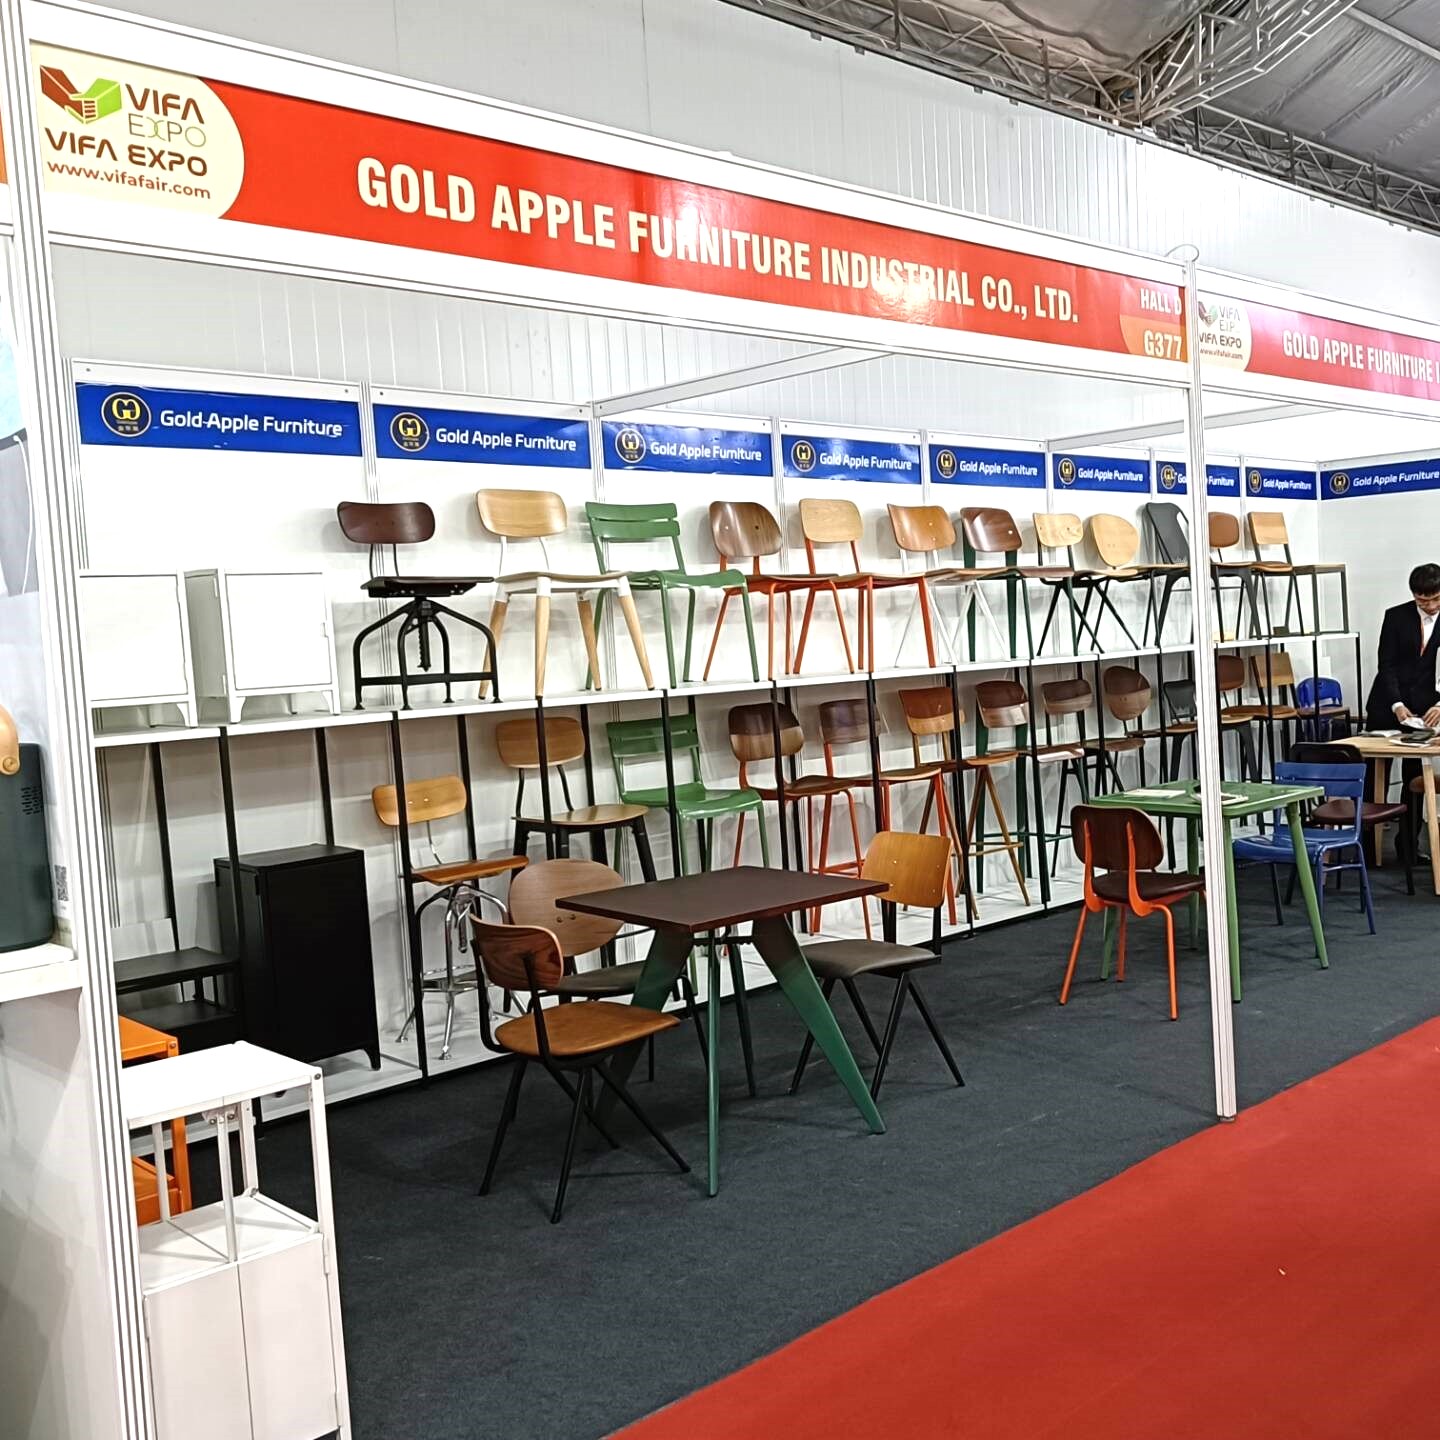 The beauty of steel furniture exhibition attracts attention at VIFA Furniture Exhibition